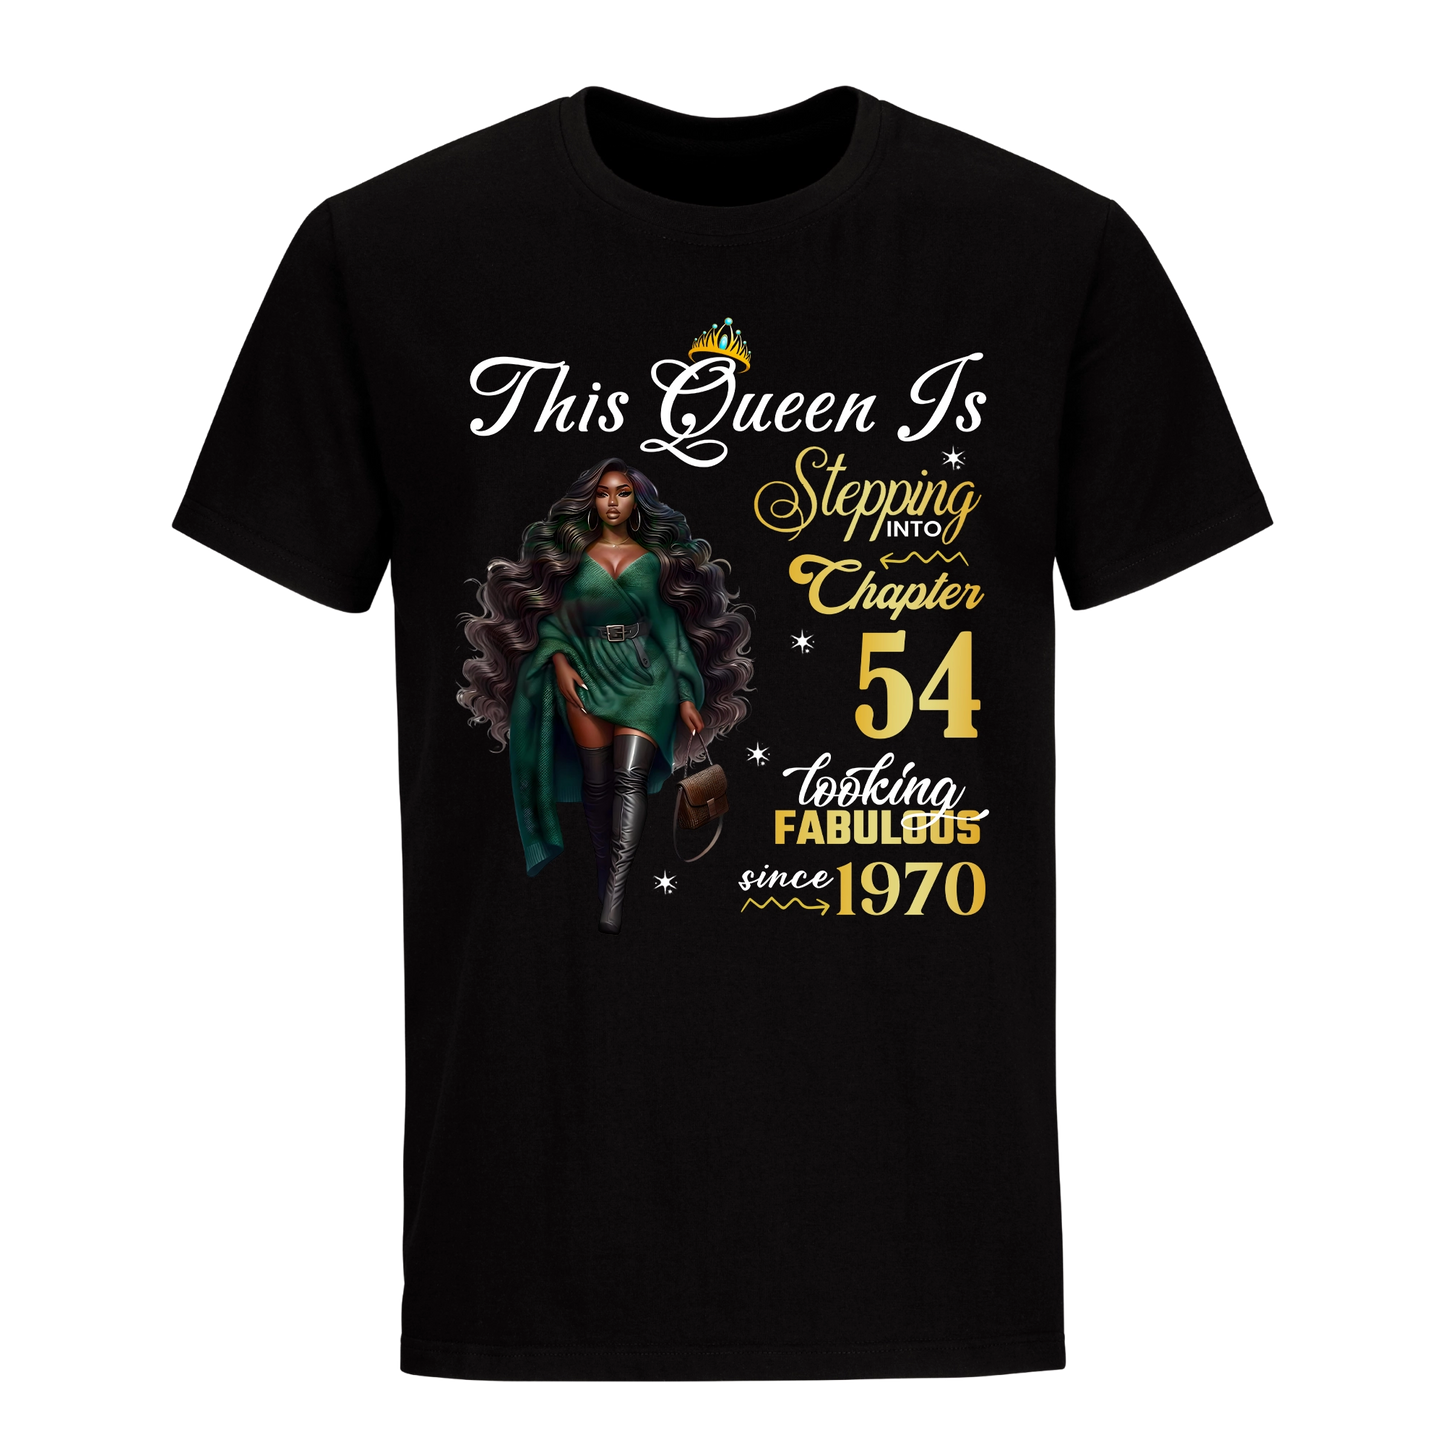 THIS QUEEN IS LOOKING FABULOUS 54 UNISEX SHIRT